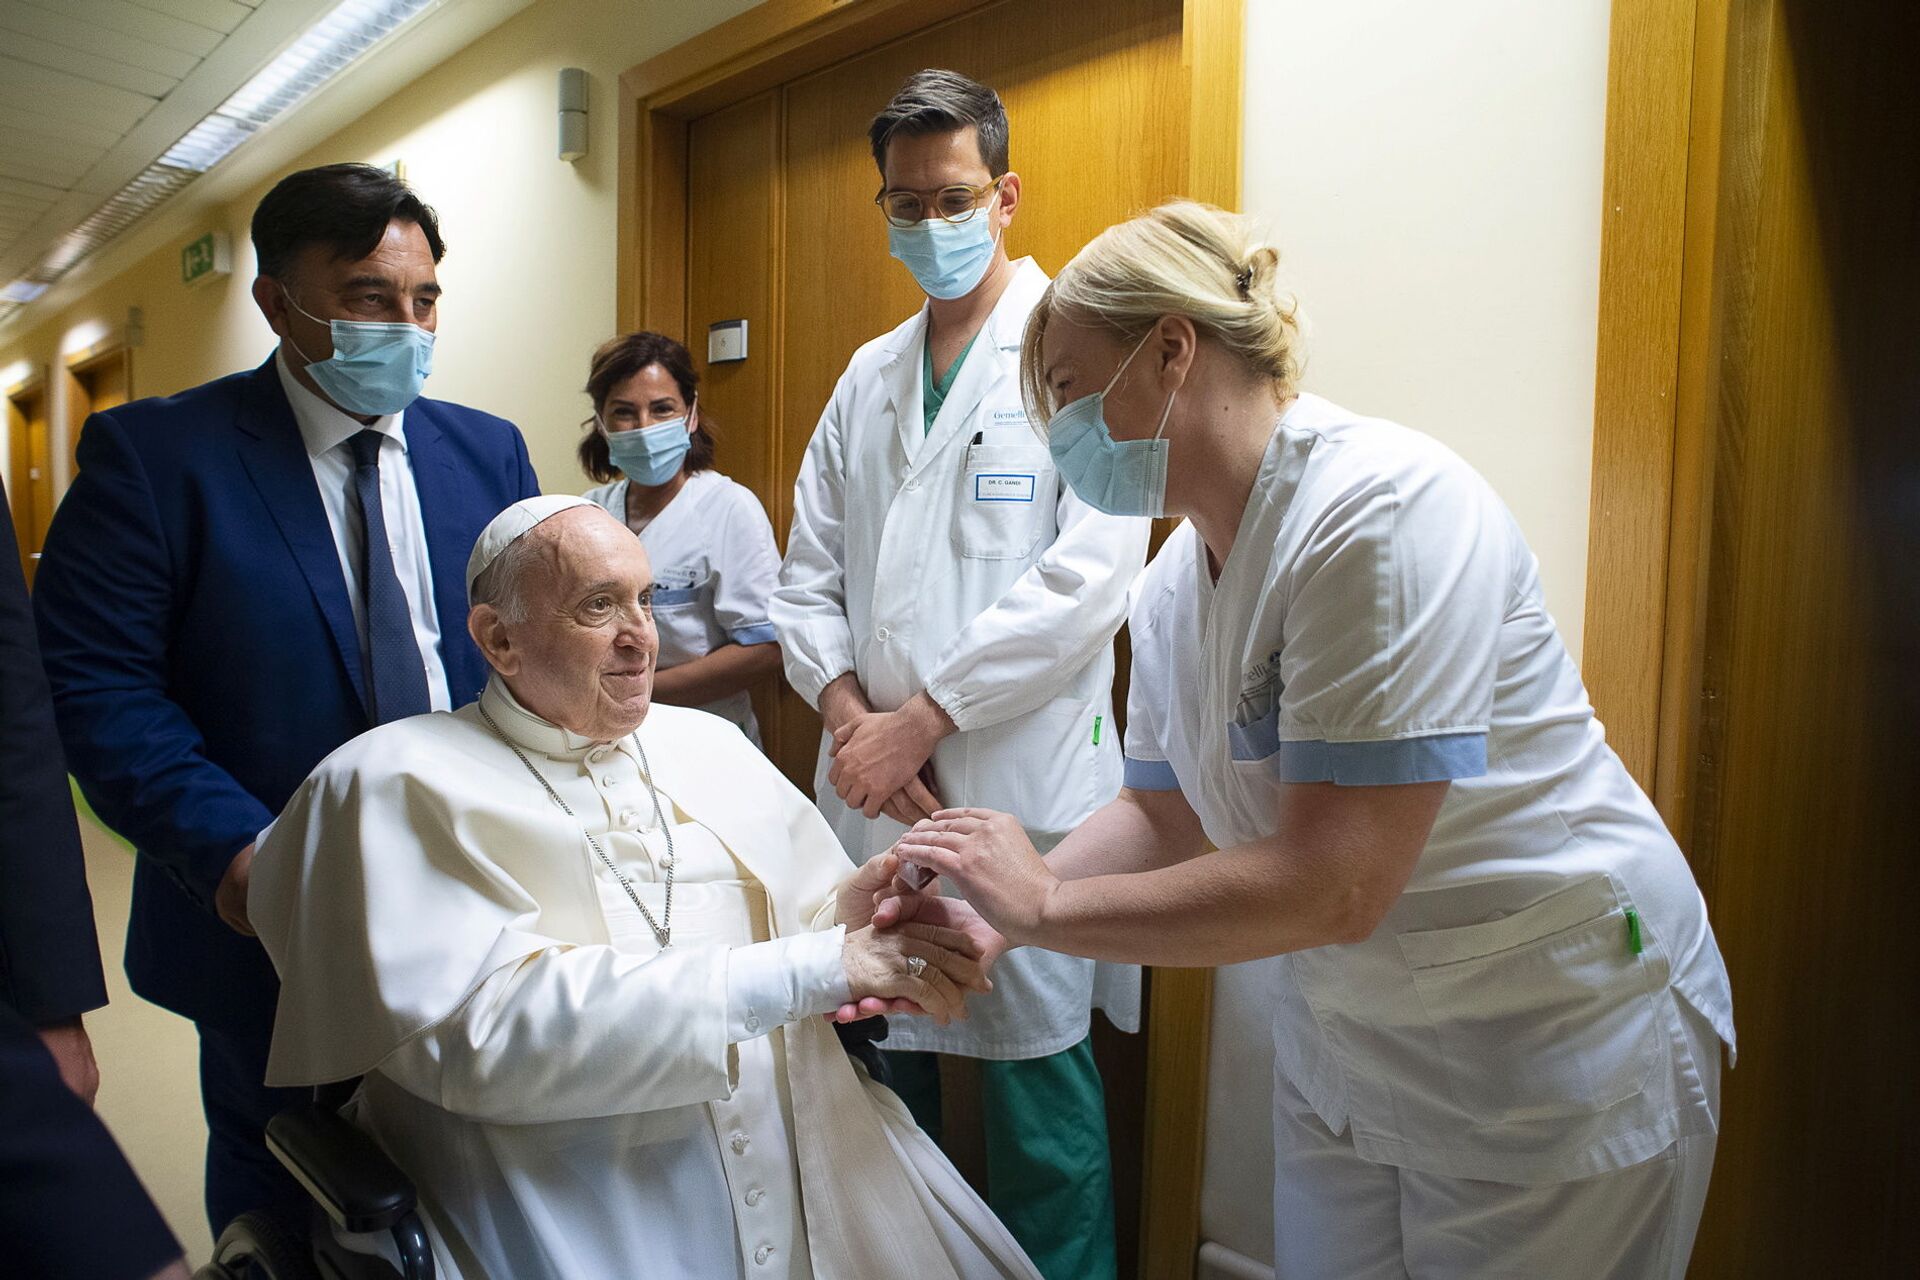 Pope Francis speaks with a health worker at the Gemelli hospital, as he recovers following scheduled surgery on his colon, in Rome, Italy, July 11, 2021 - Sputnik International, 1920, 07.09.2021